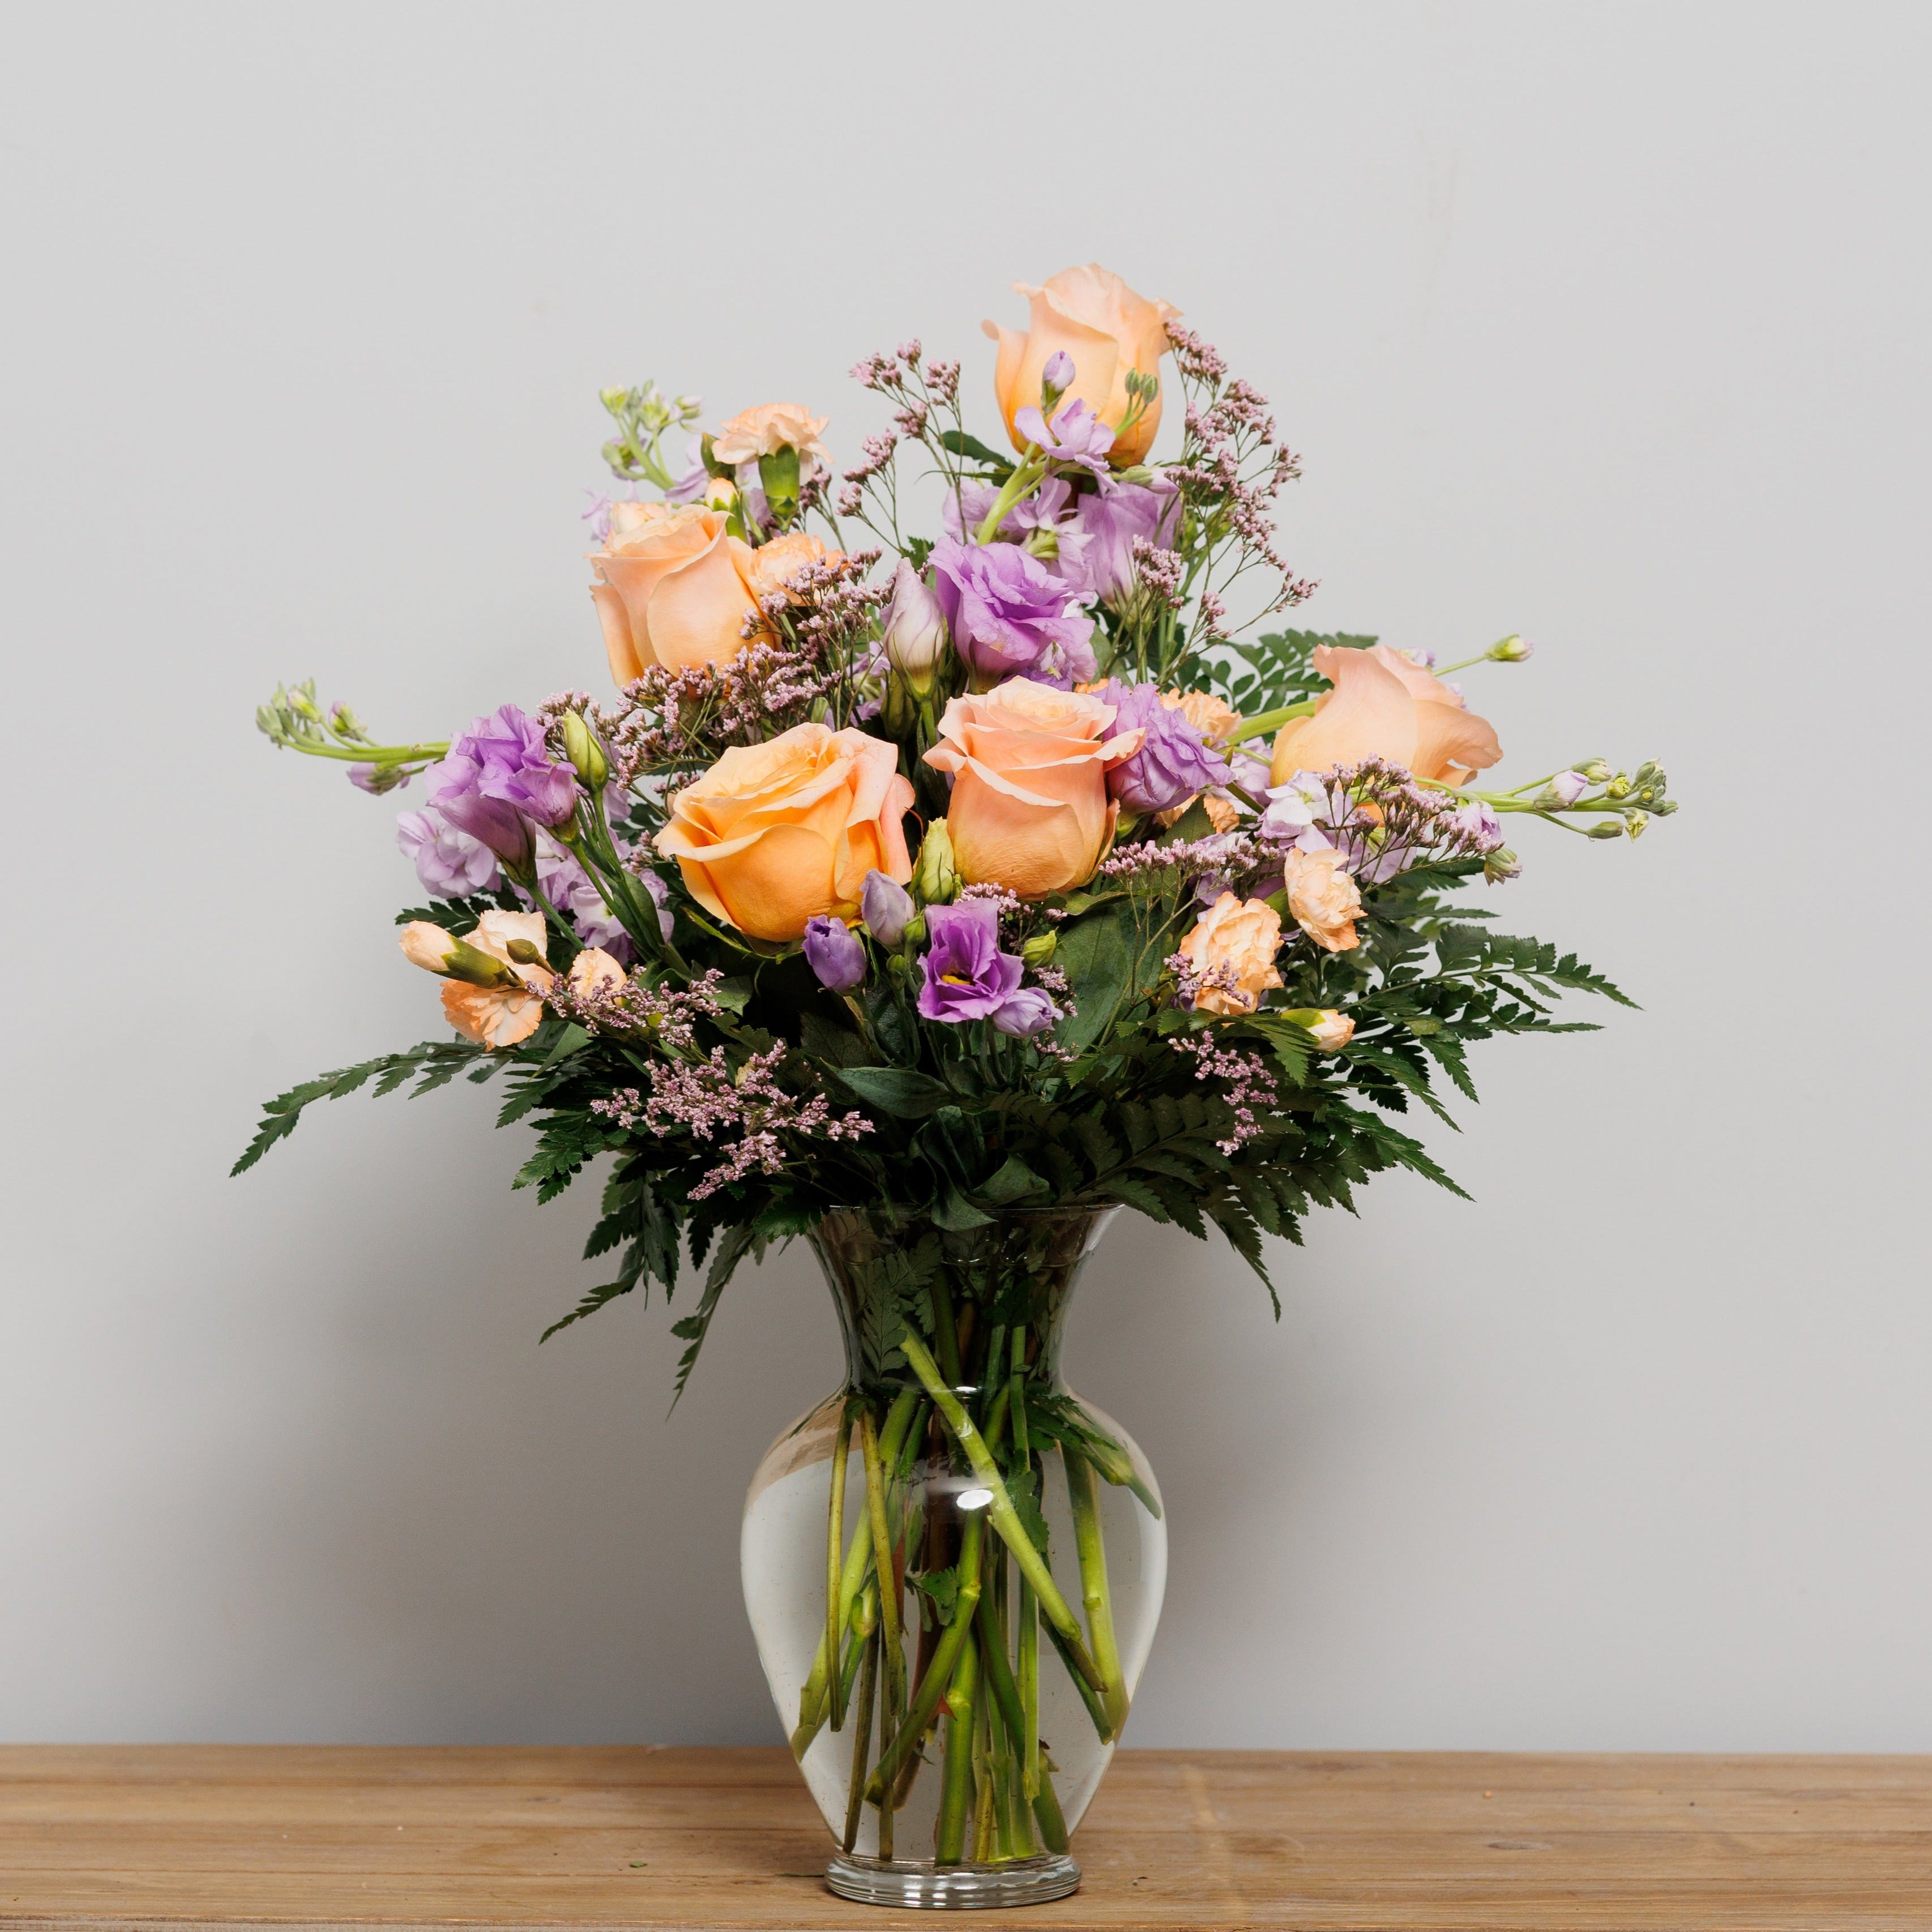 A vase arrangement with lavender and peach flowers.